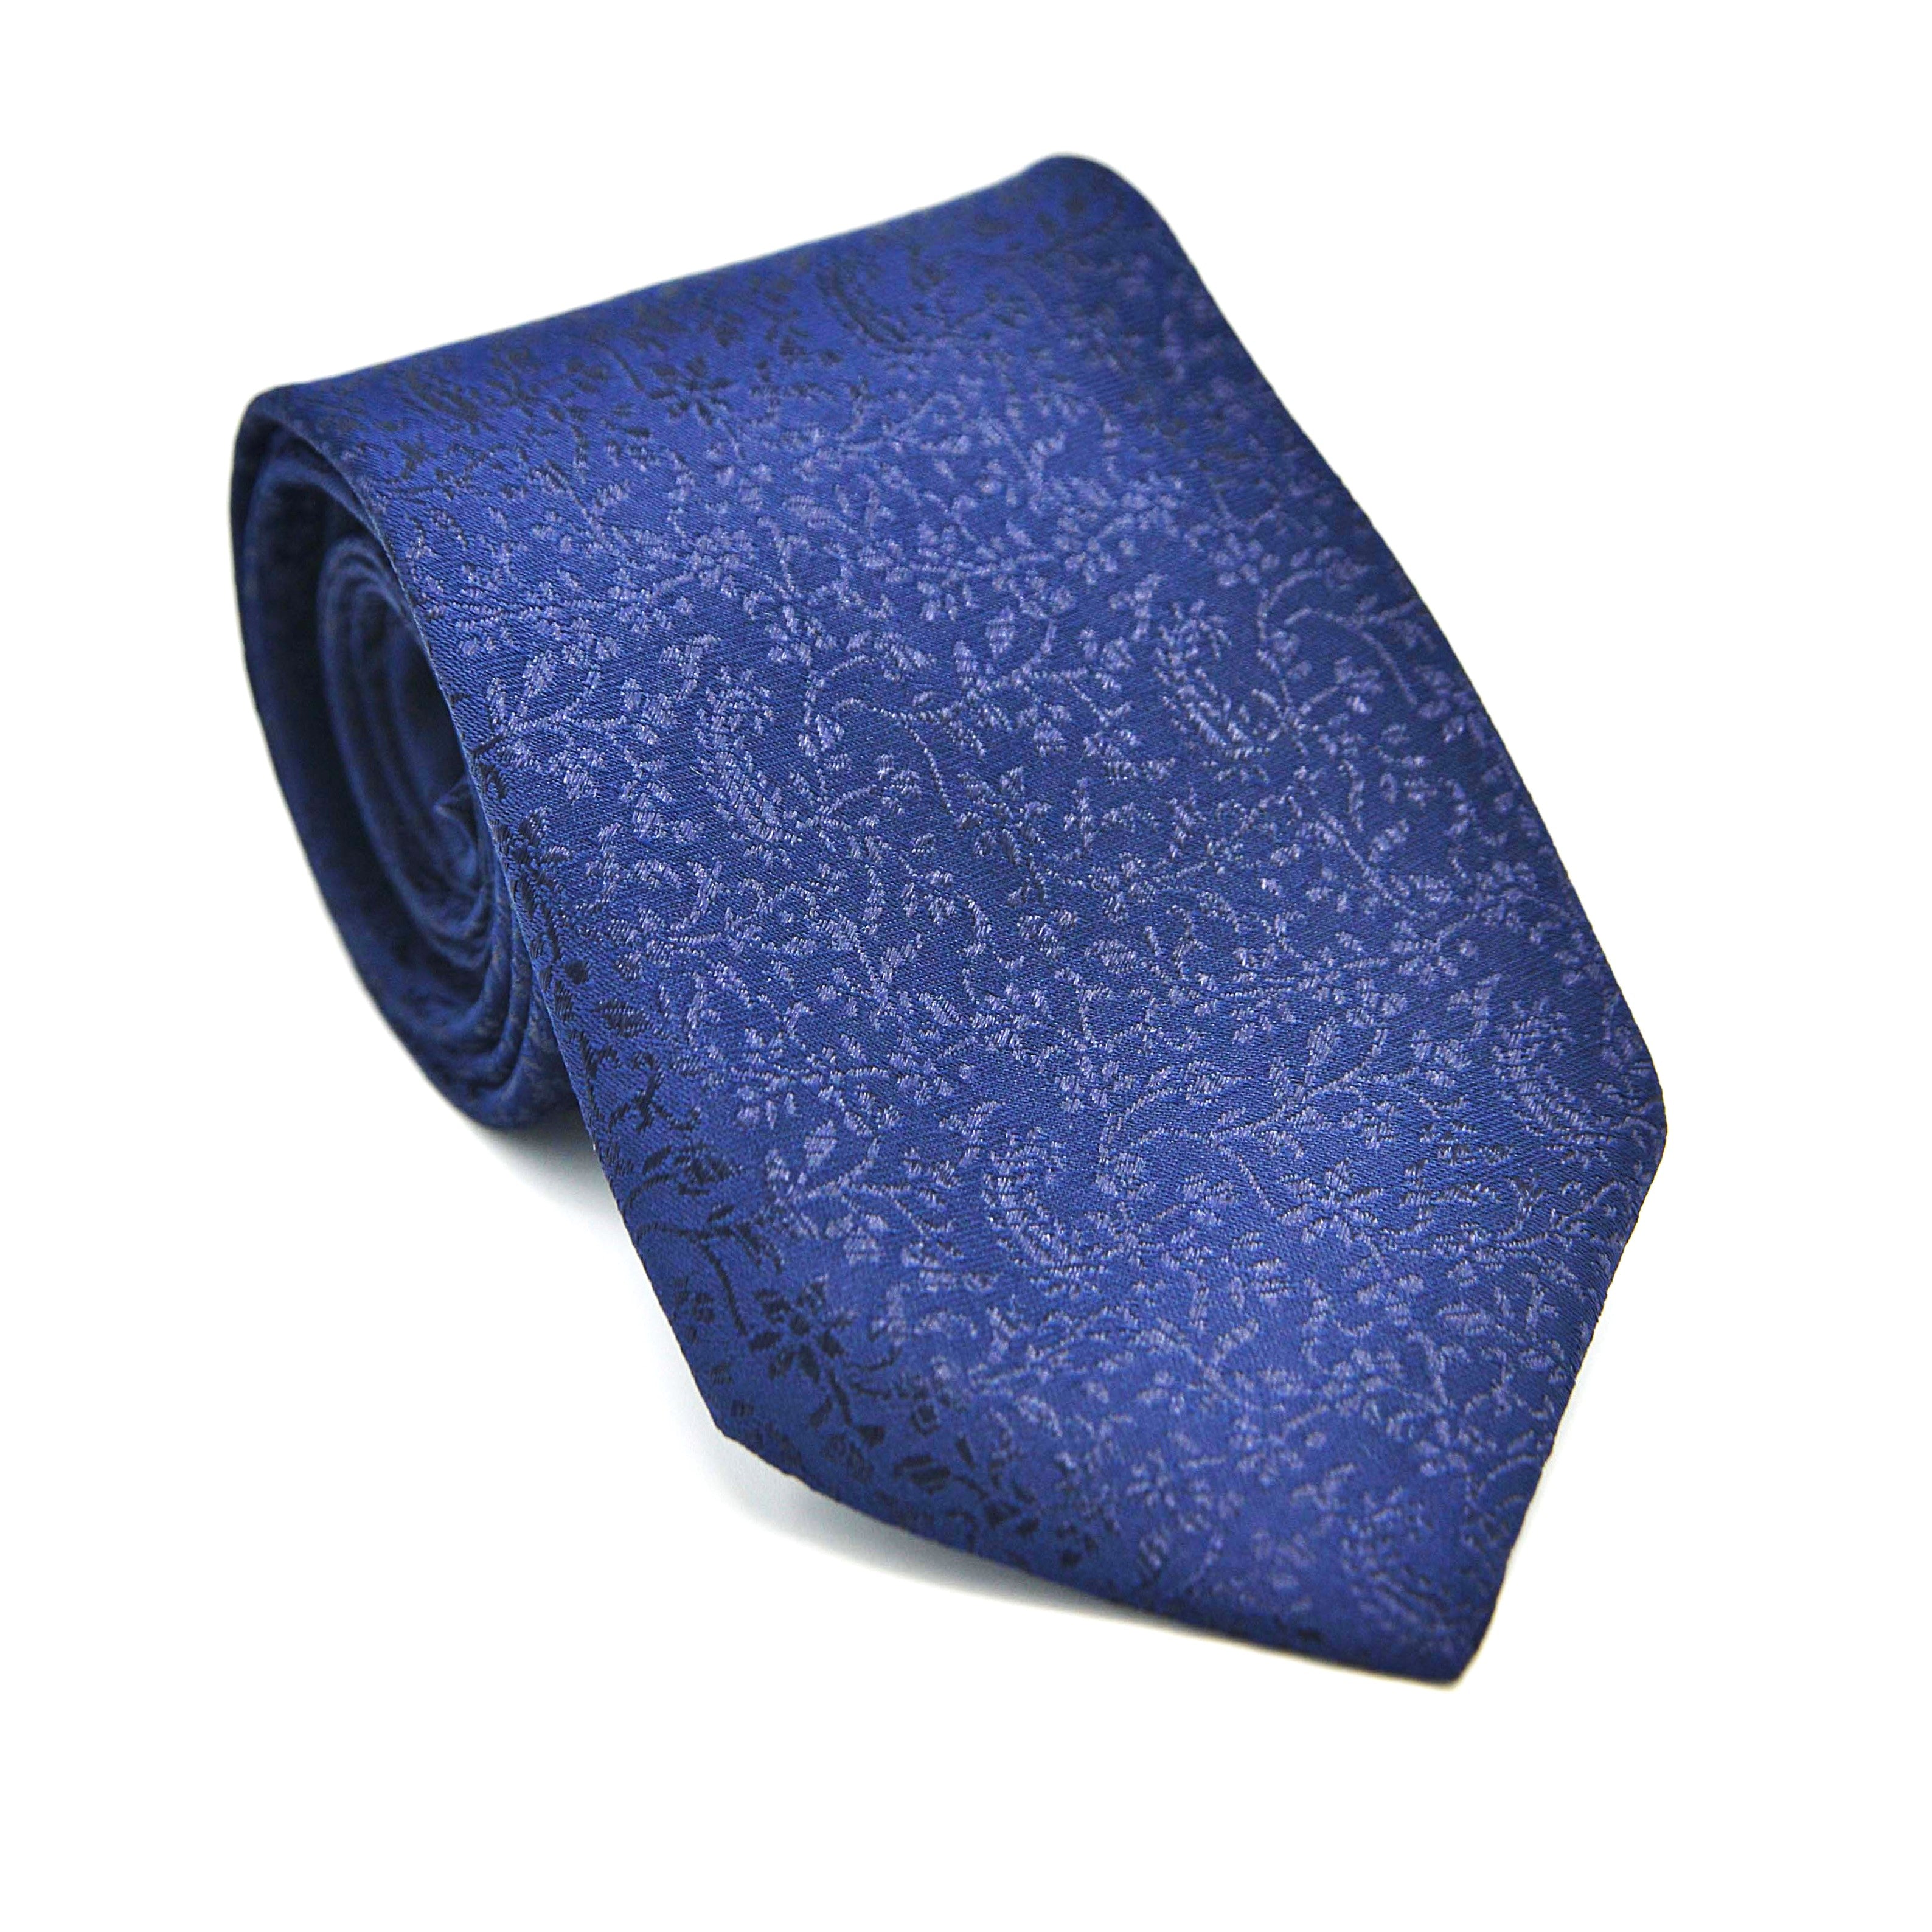 NAVY BLUE PAISLEY NECKTIE AND POCKET SQUARE SET